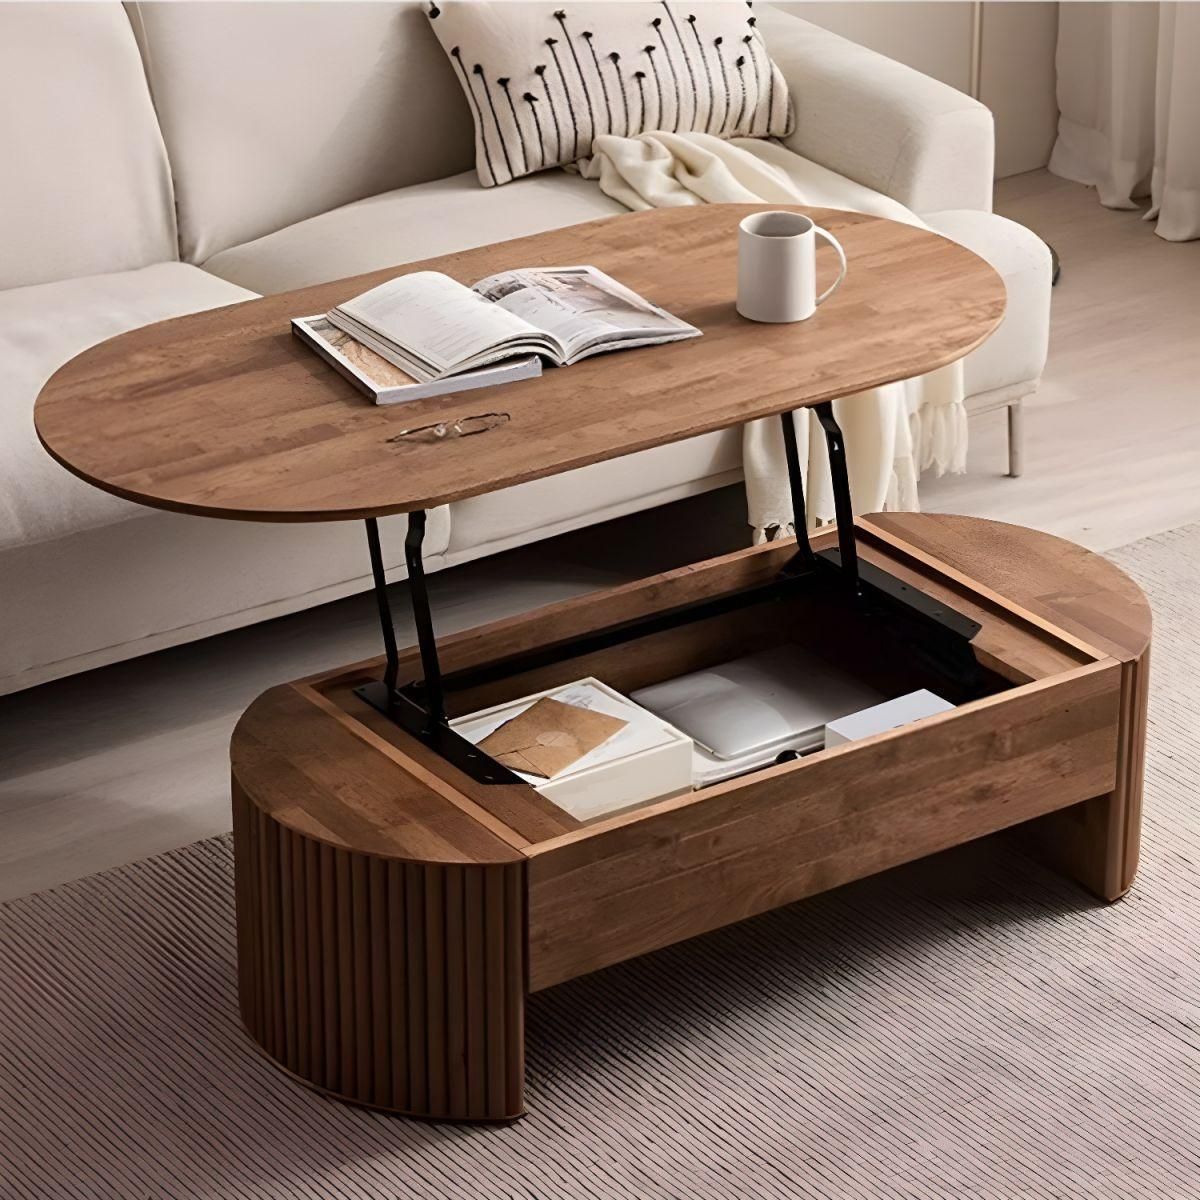 The Perfect Blend: Functional and Stylish Wood Coffee Tables with Storage